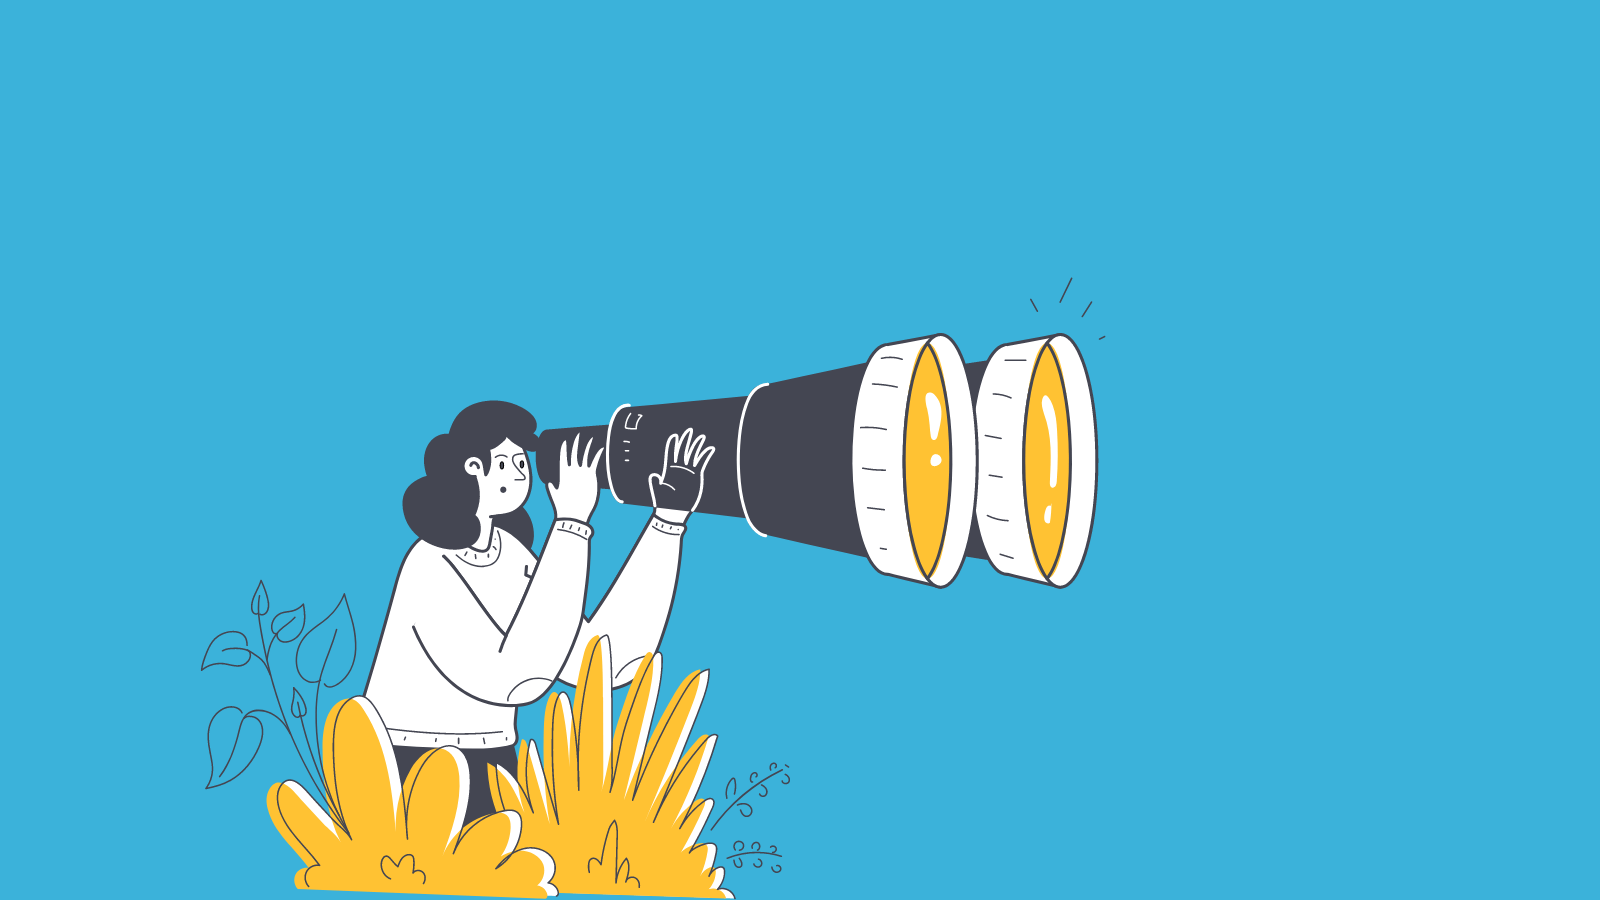 An illustration of a woman using comically large binoculars